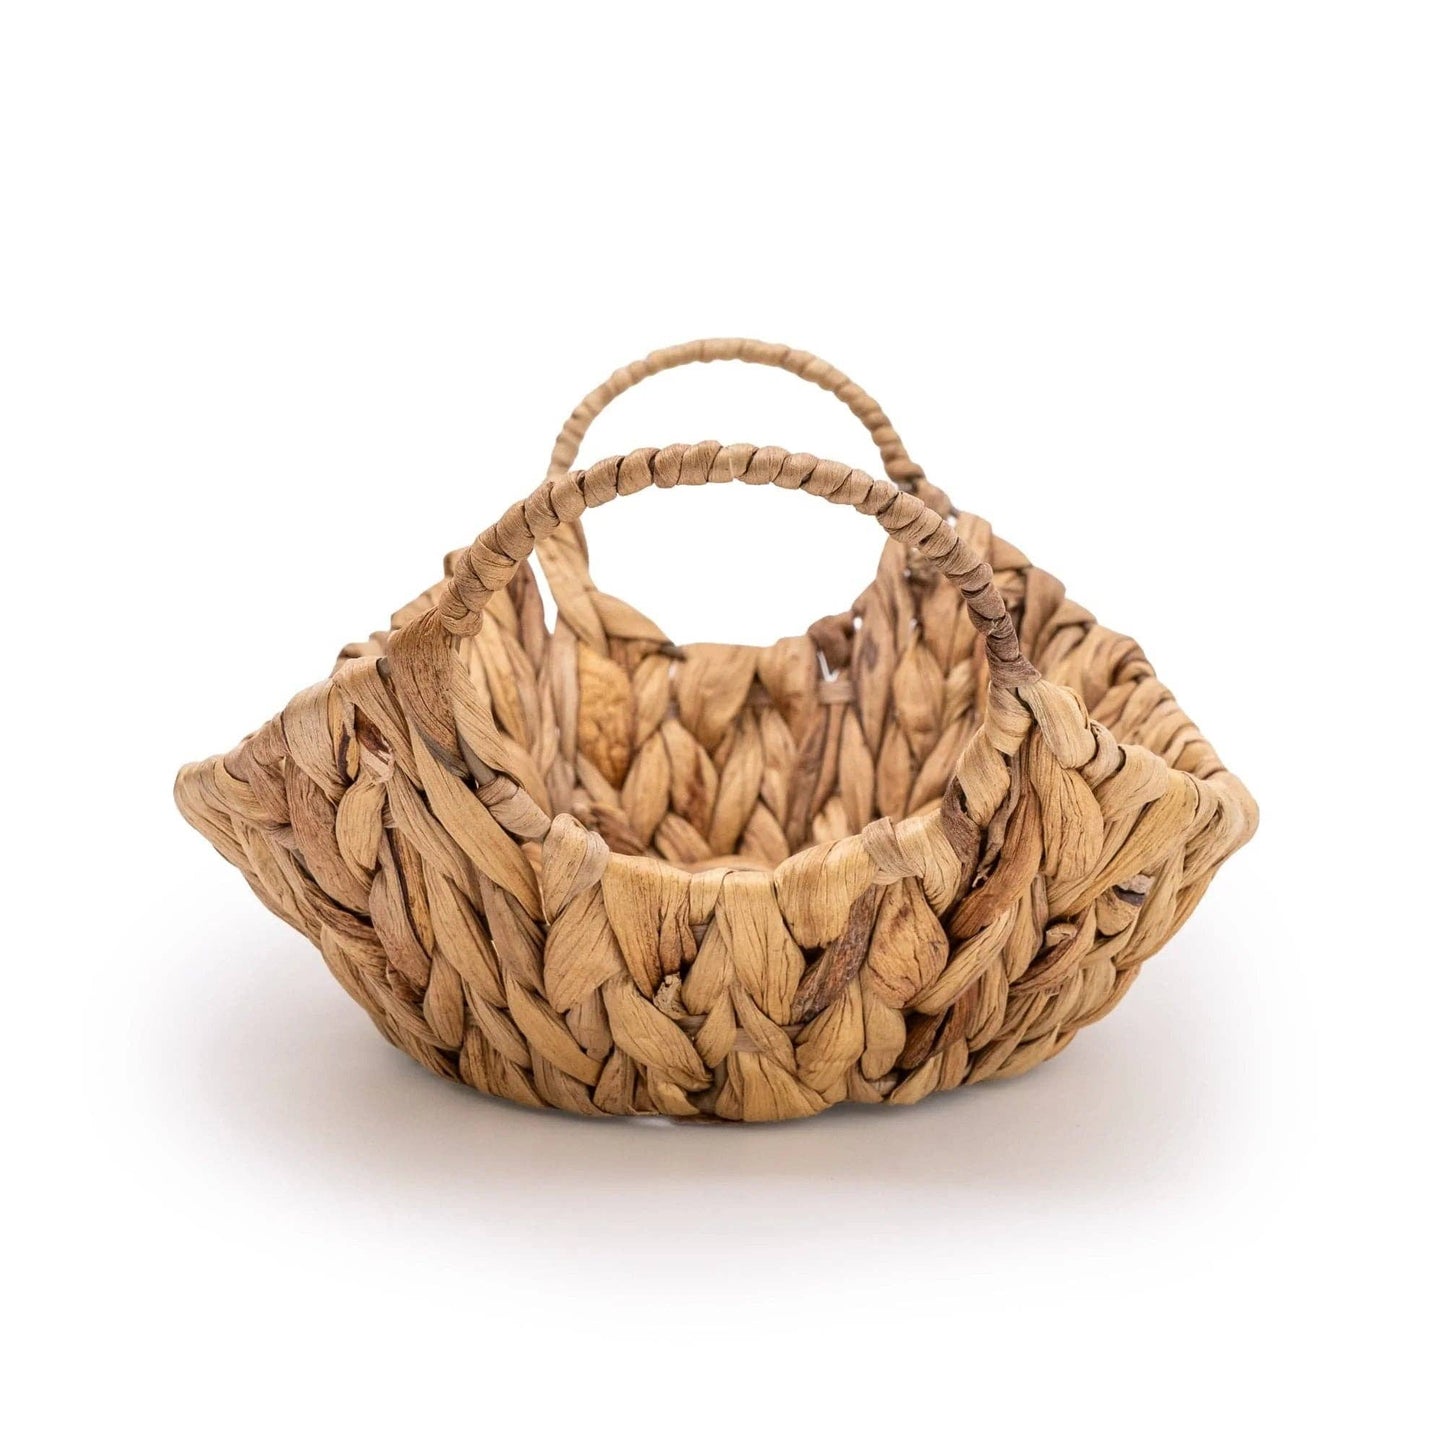 Seagrass Basket With Handles 36cm